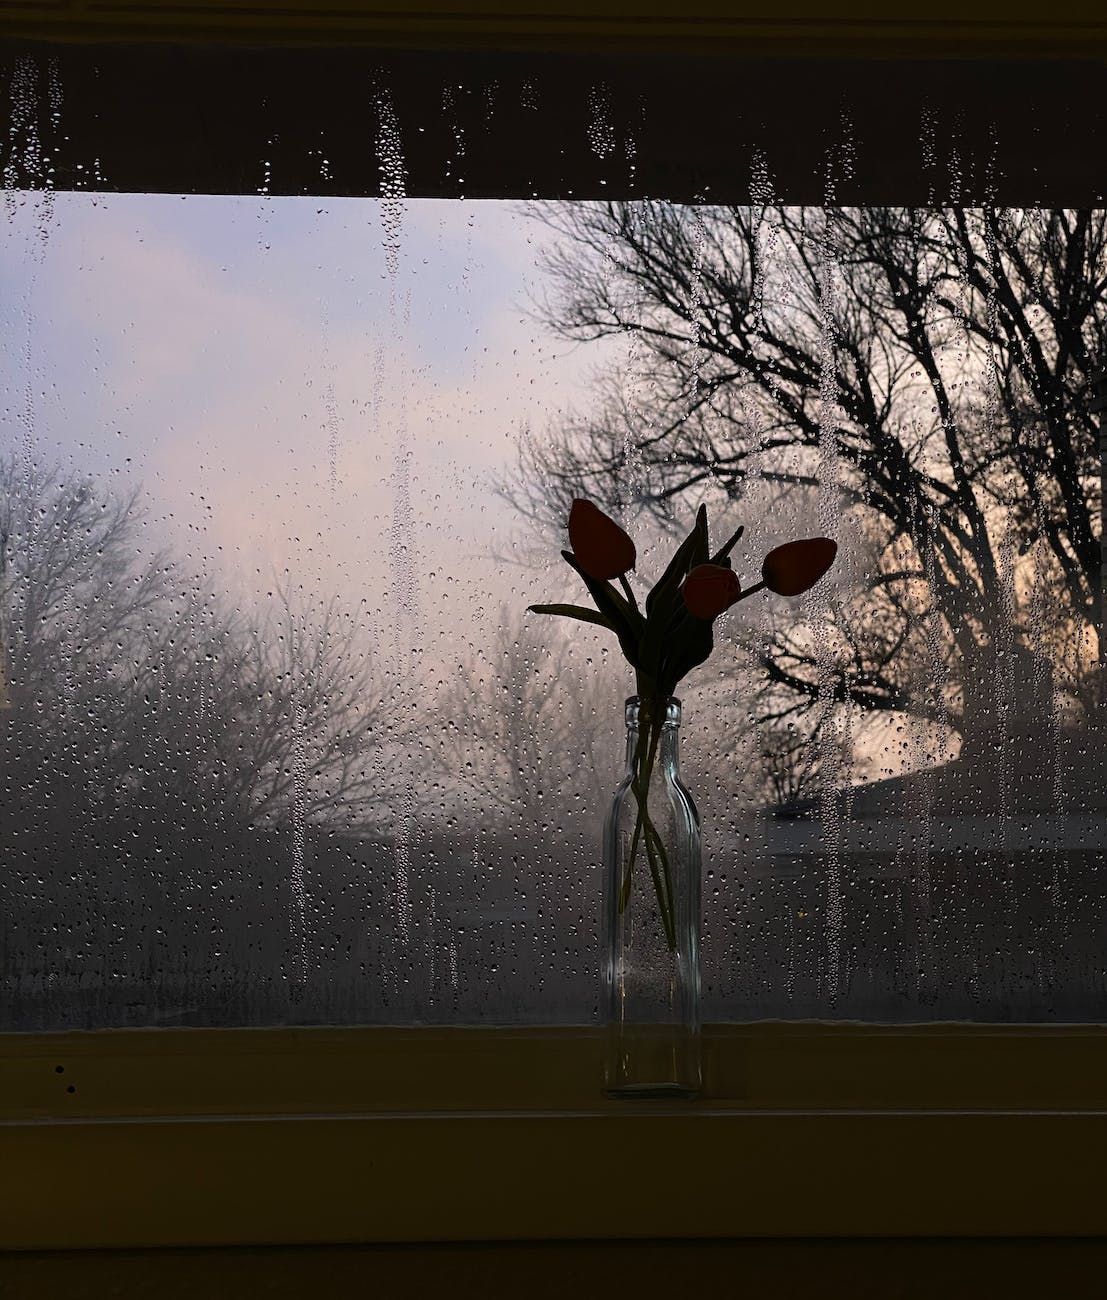 blooming tulips placed near window during rain